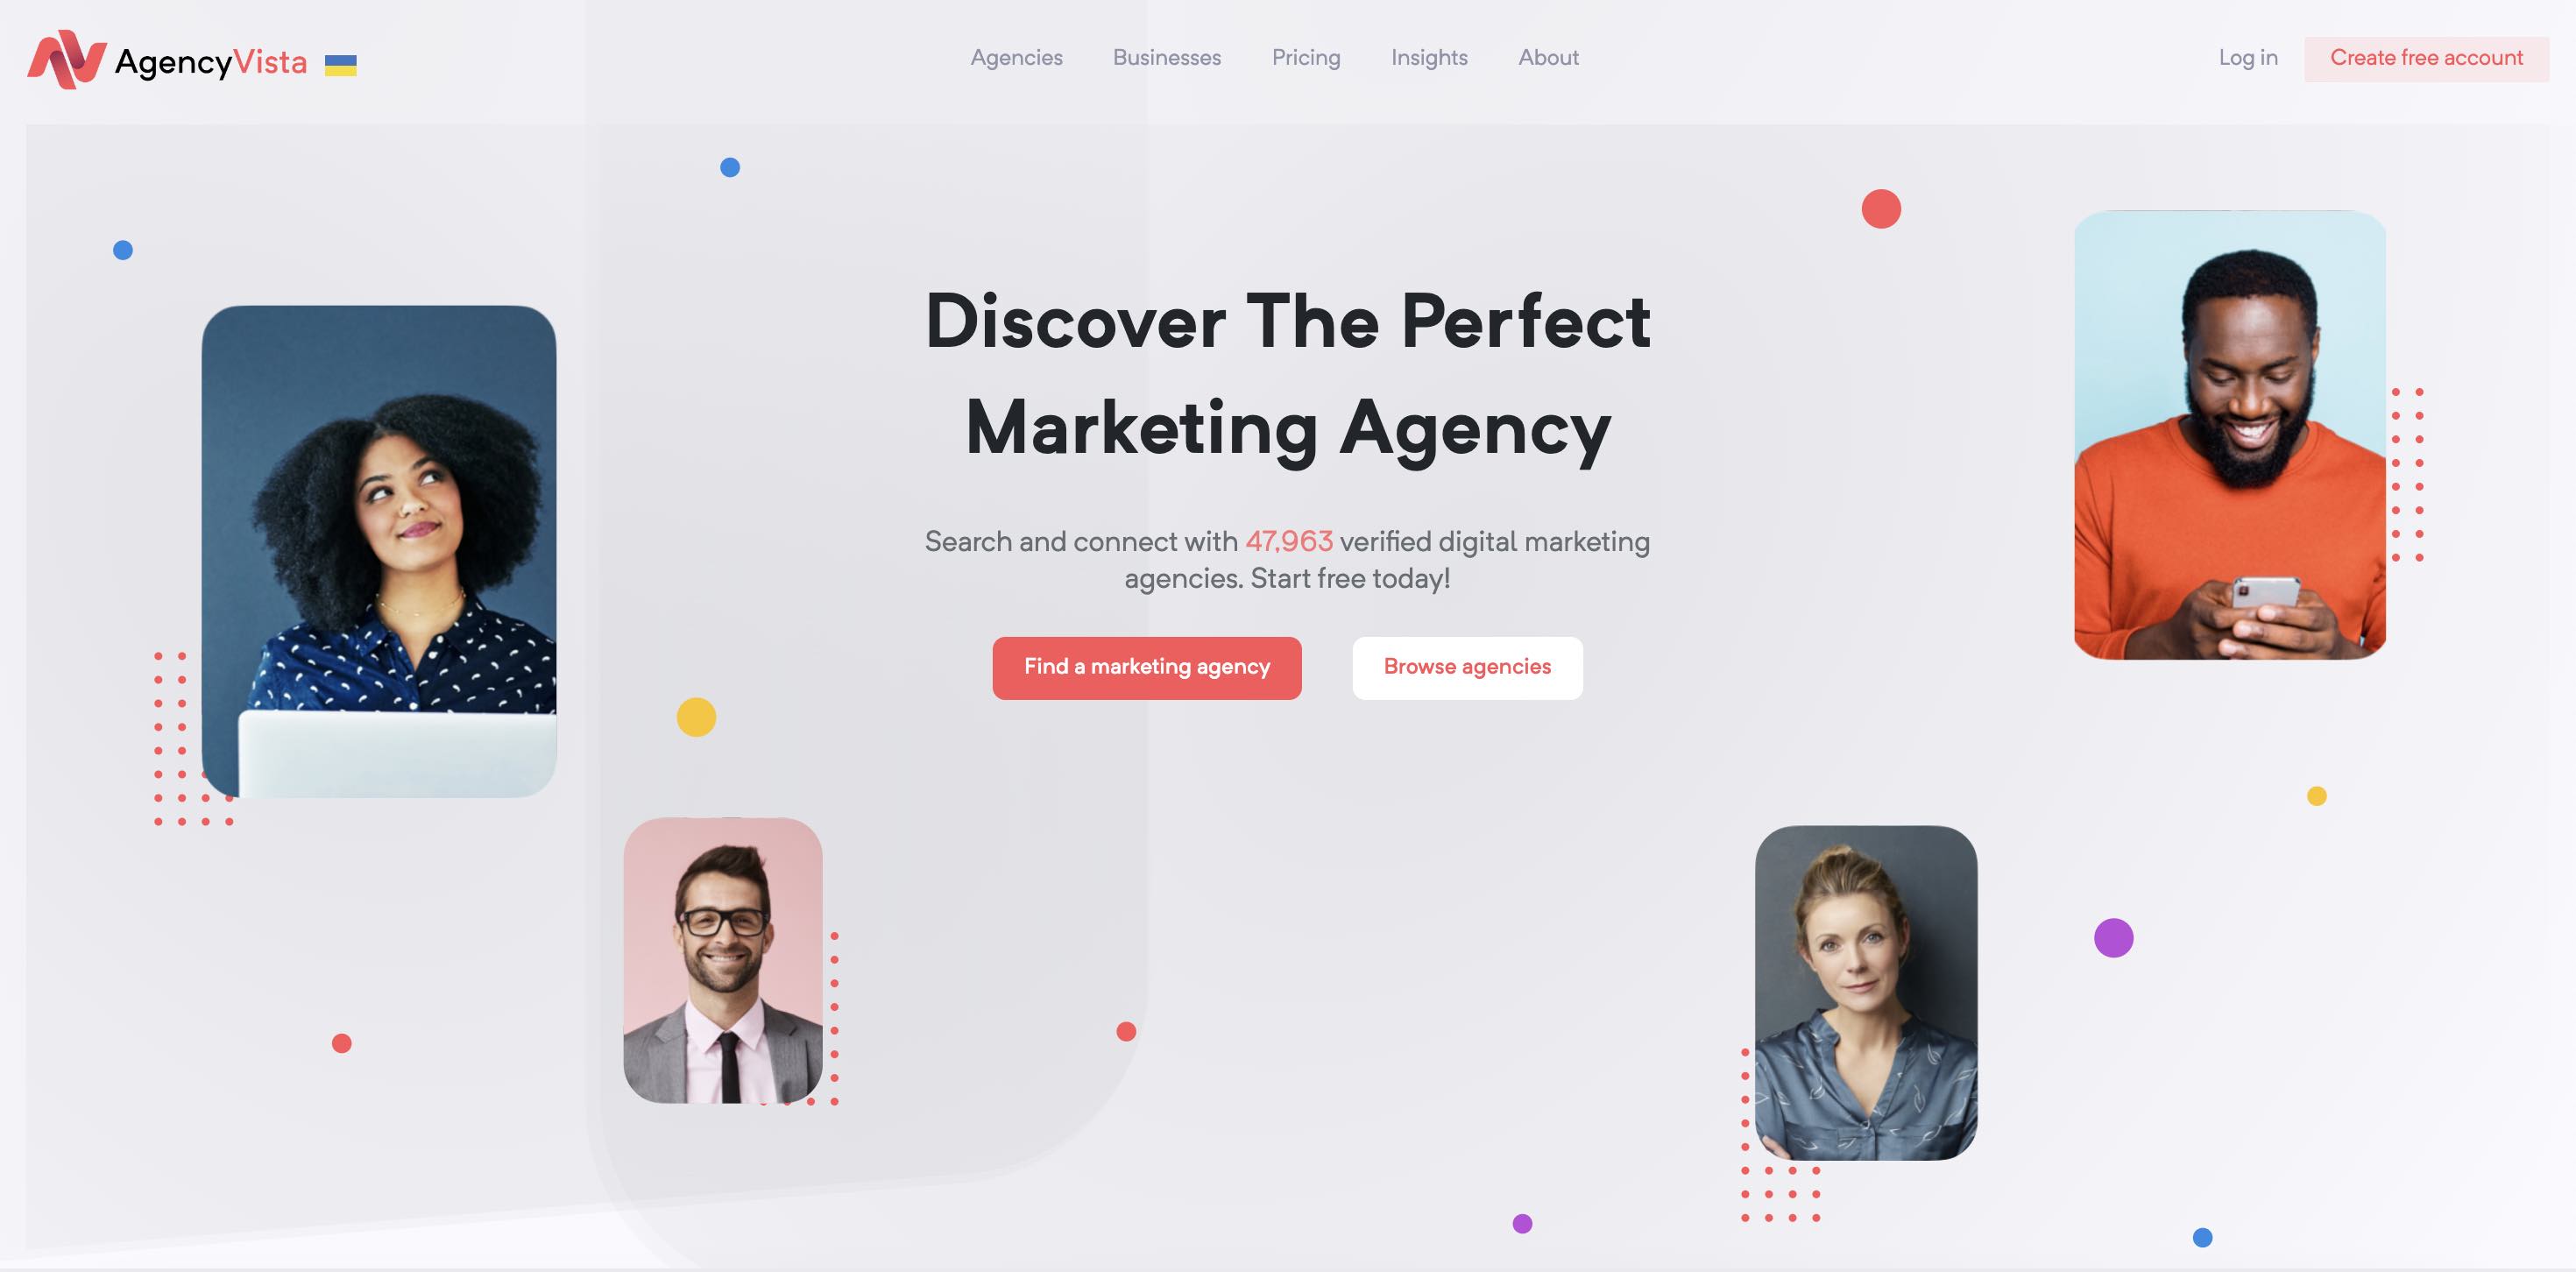 Agency Vista is the best digital marketing agency and ad agency directory